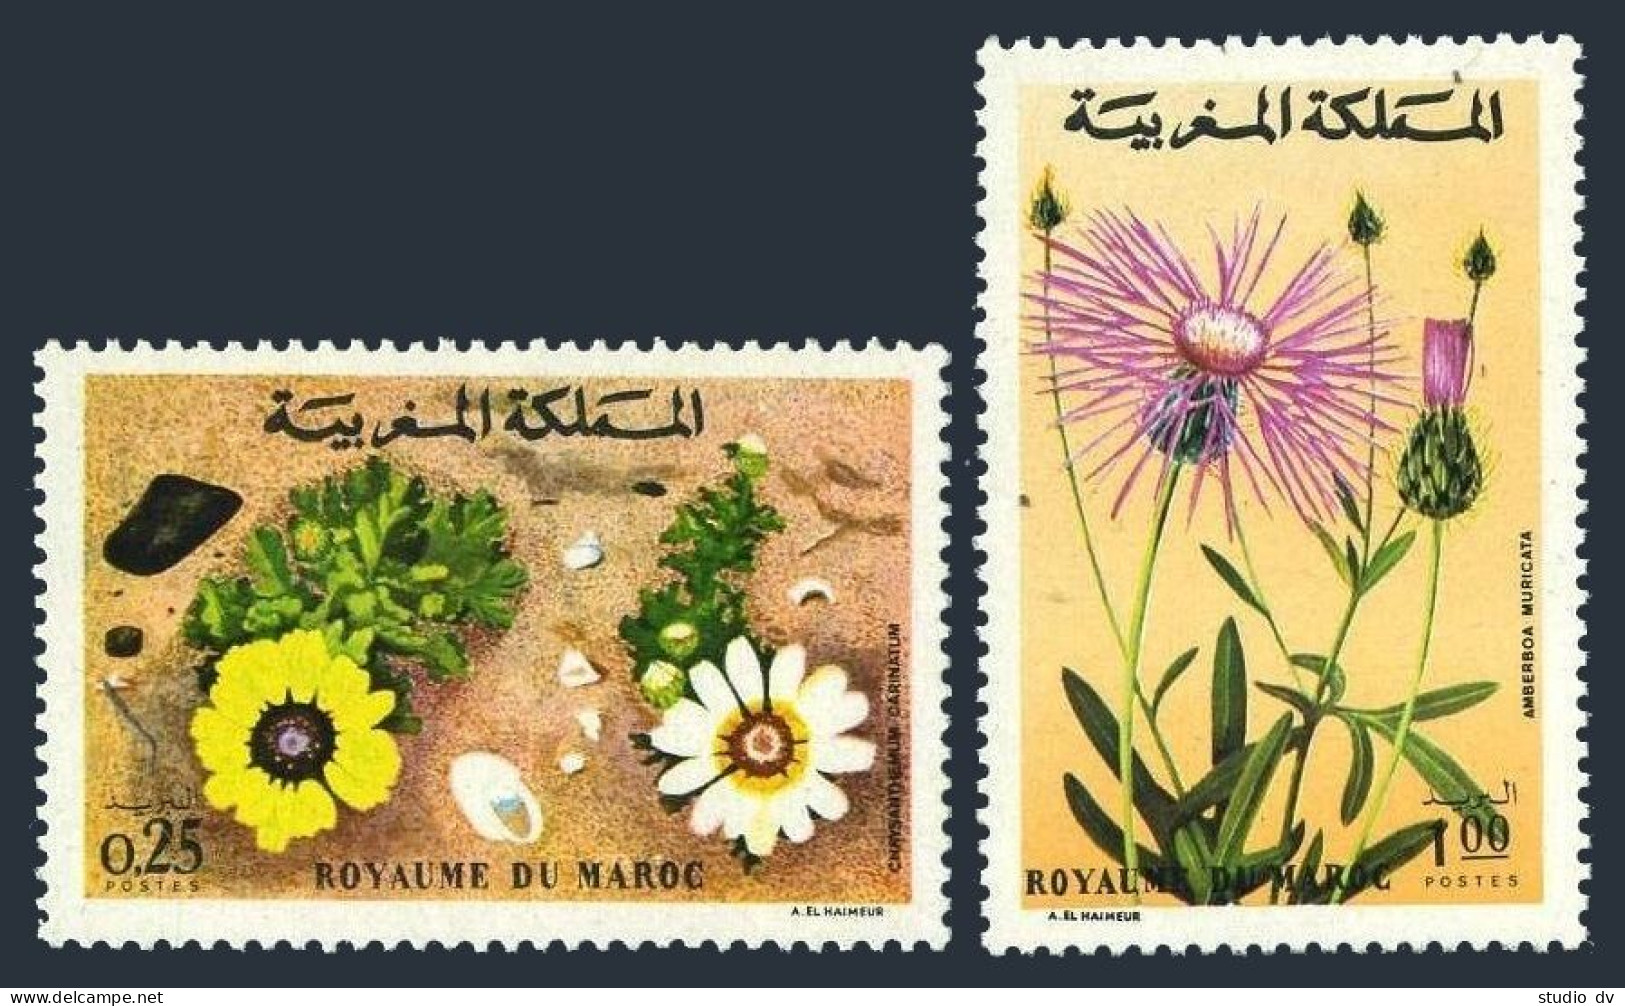 Morocco 305-306,MNH.Michel 754-755. Nature Protection.Flowers 1973. - Maroc (1956-...)